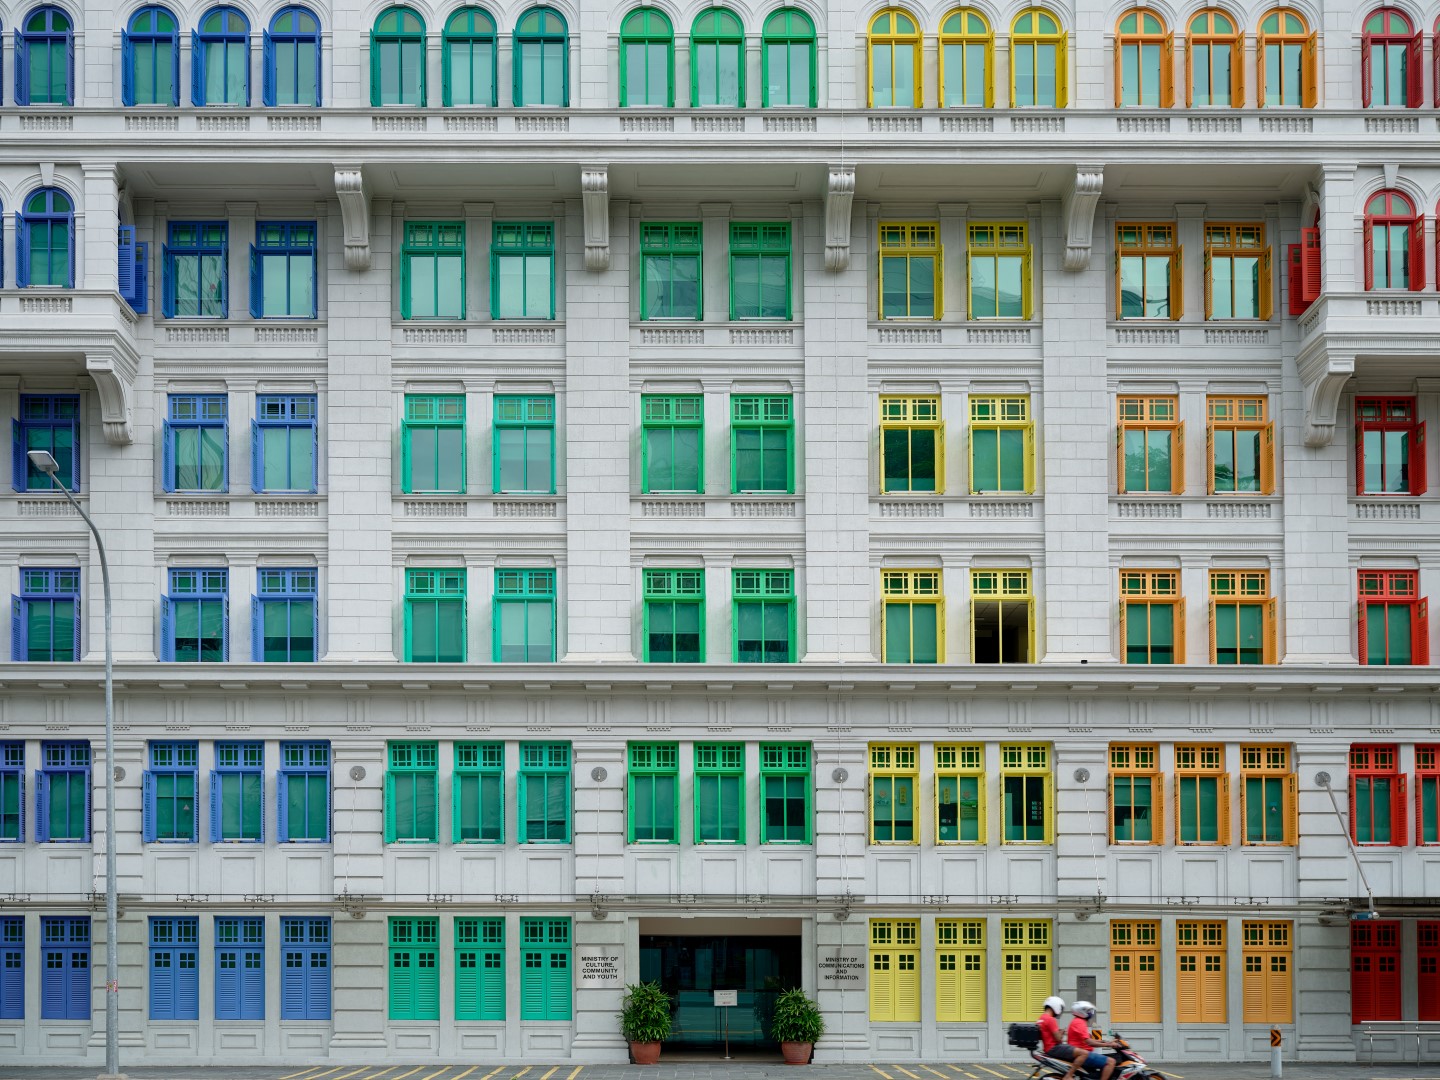 A bright, cheerful colour scheme was chosen to enliven the otherwise stern facade of Old Hill Street Police Station, Singapore